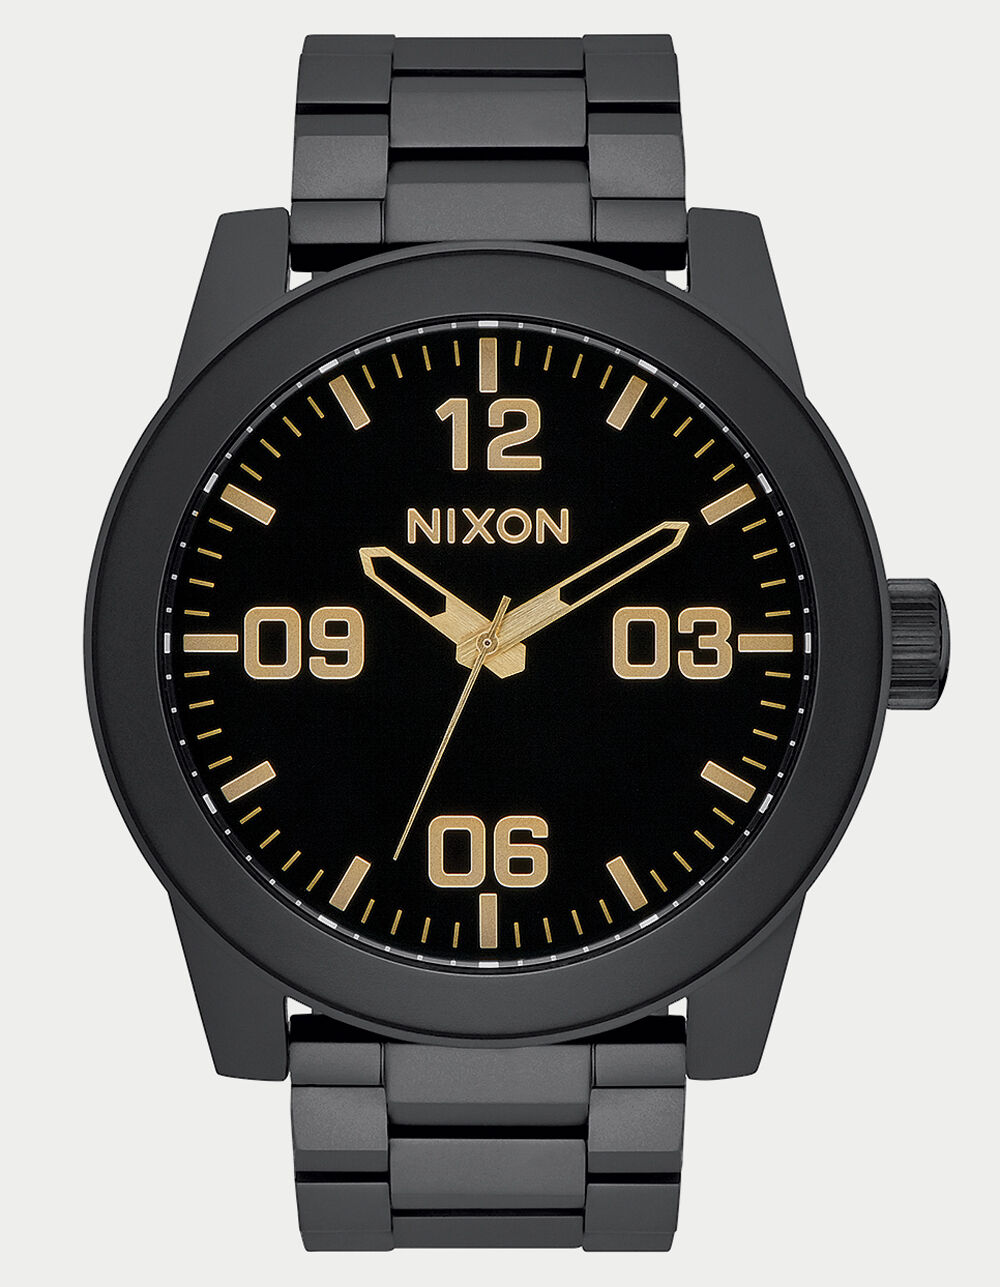 NIXON Corporal Stainless Steel Watch